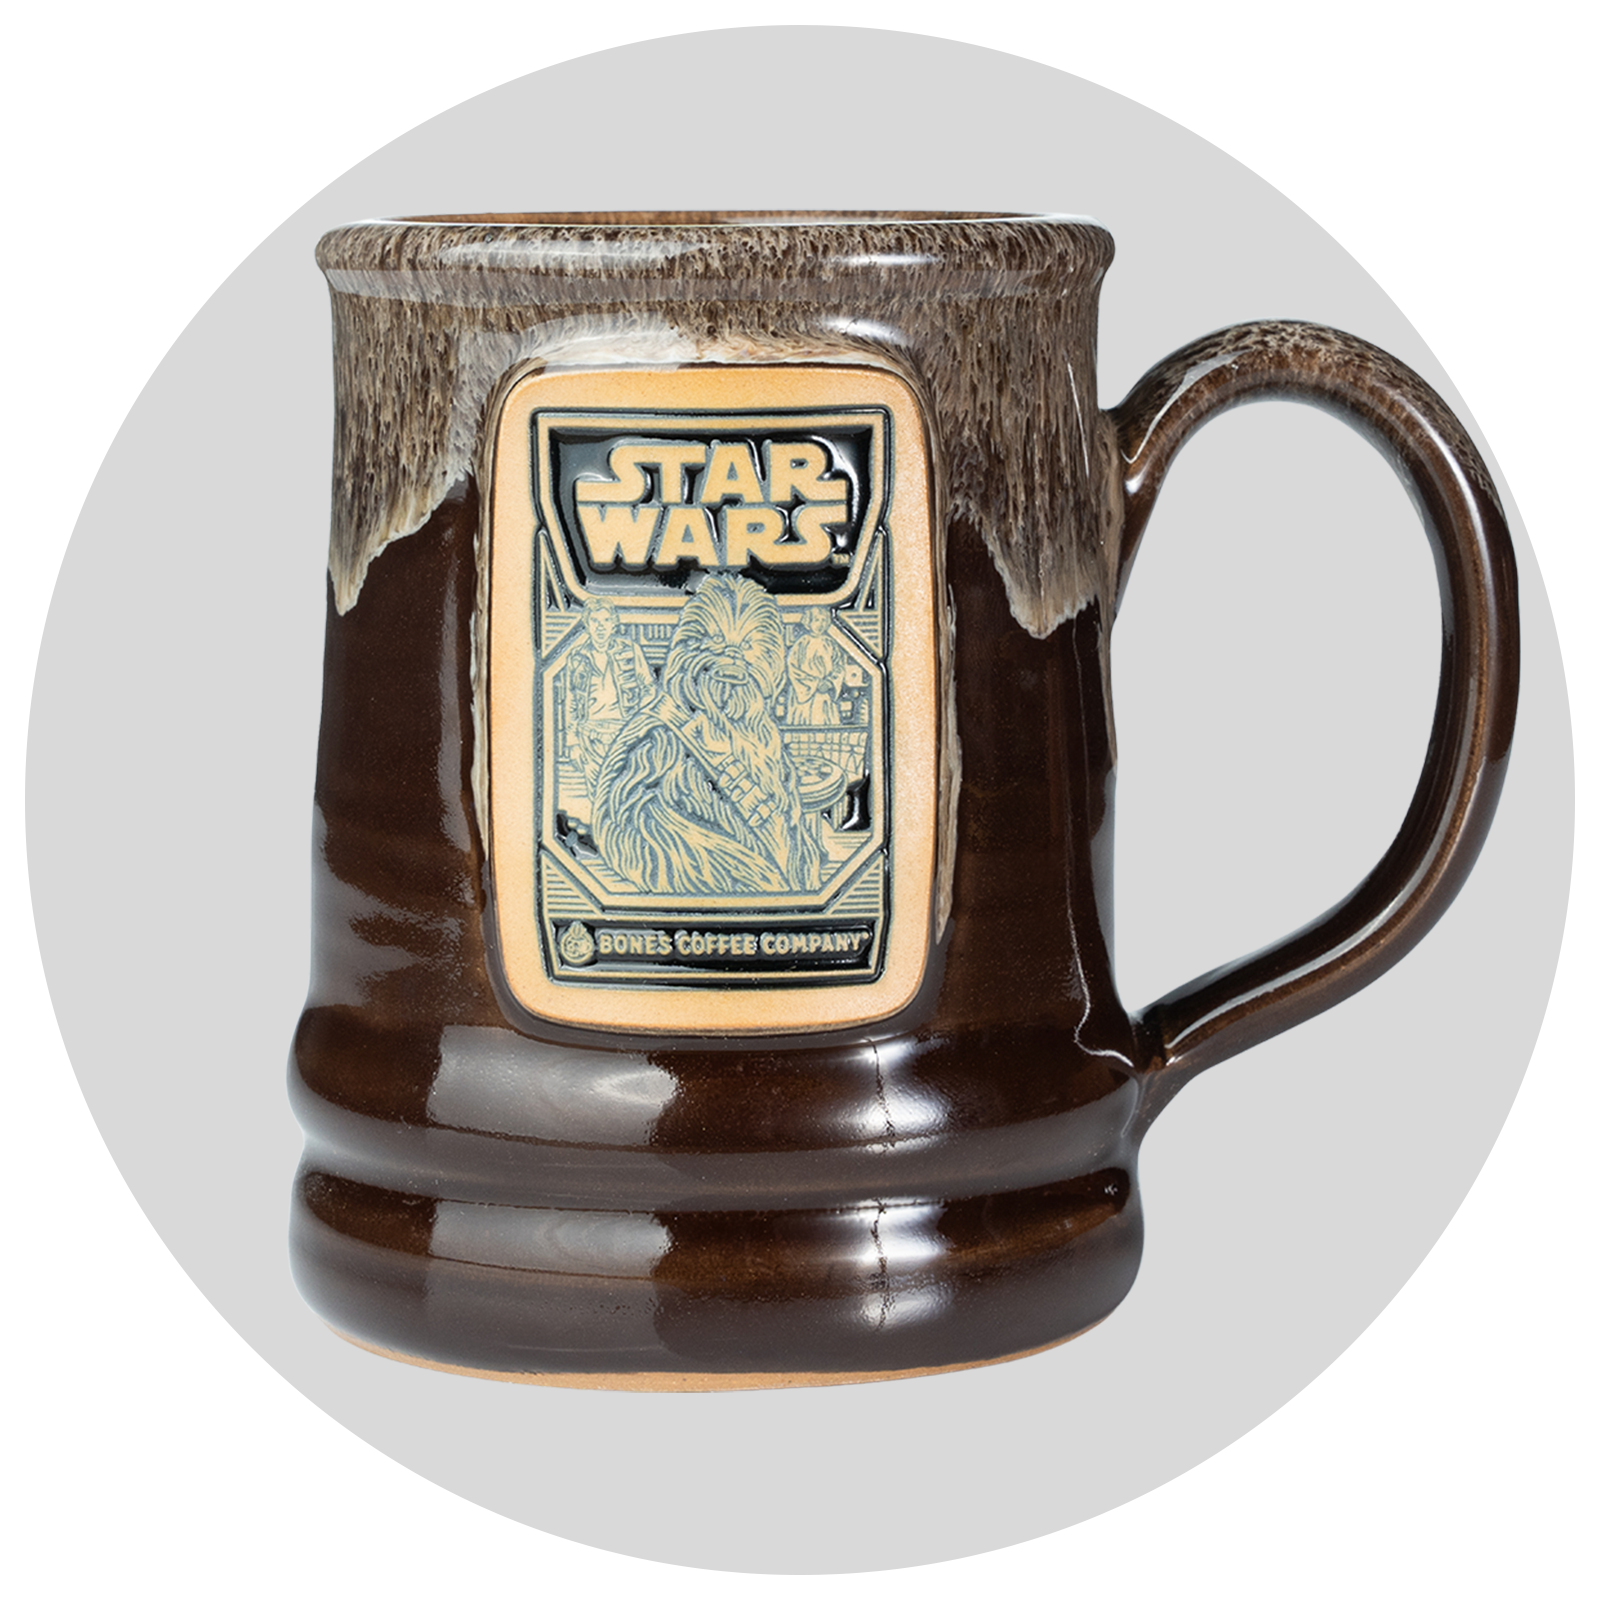 The front of the Bones Coffee Company Wookiee Cookie Hand Thrown Mug. It's colored chocolate with a sand-white glaze on top of it. The golden medallion has the Wookiee Cookie art on it. Behind it is a gray circle.